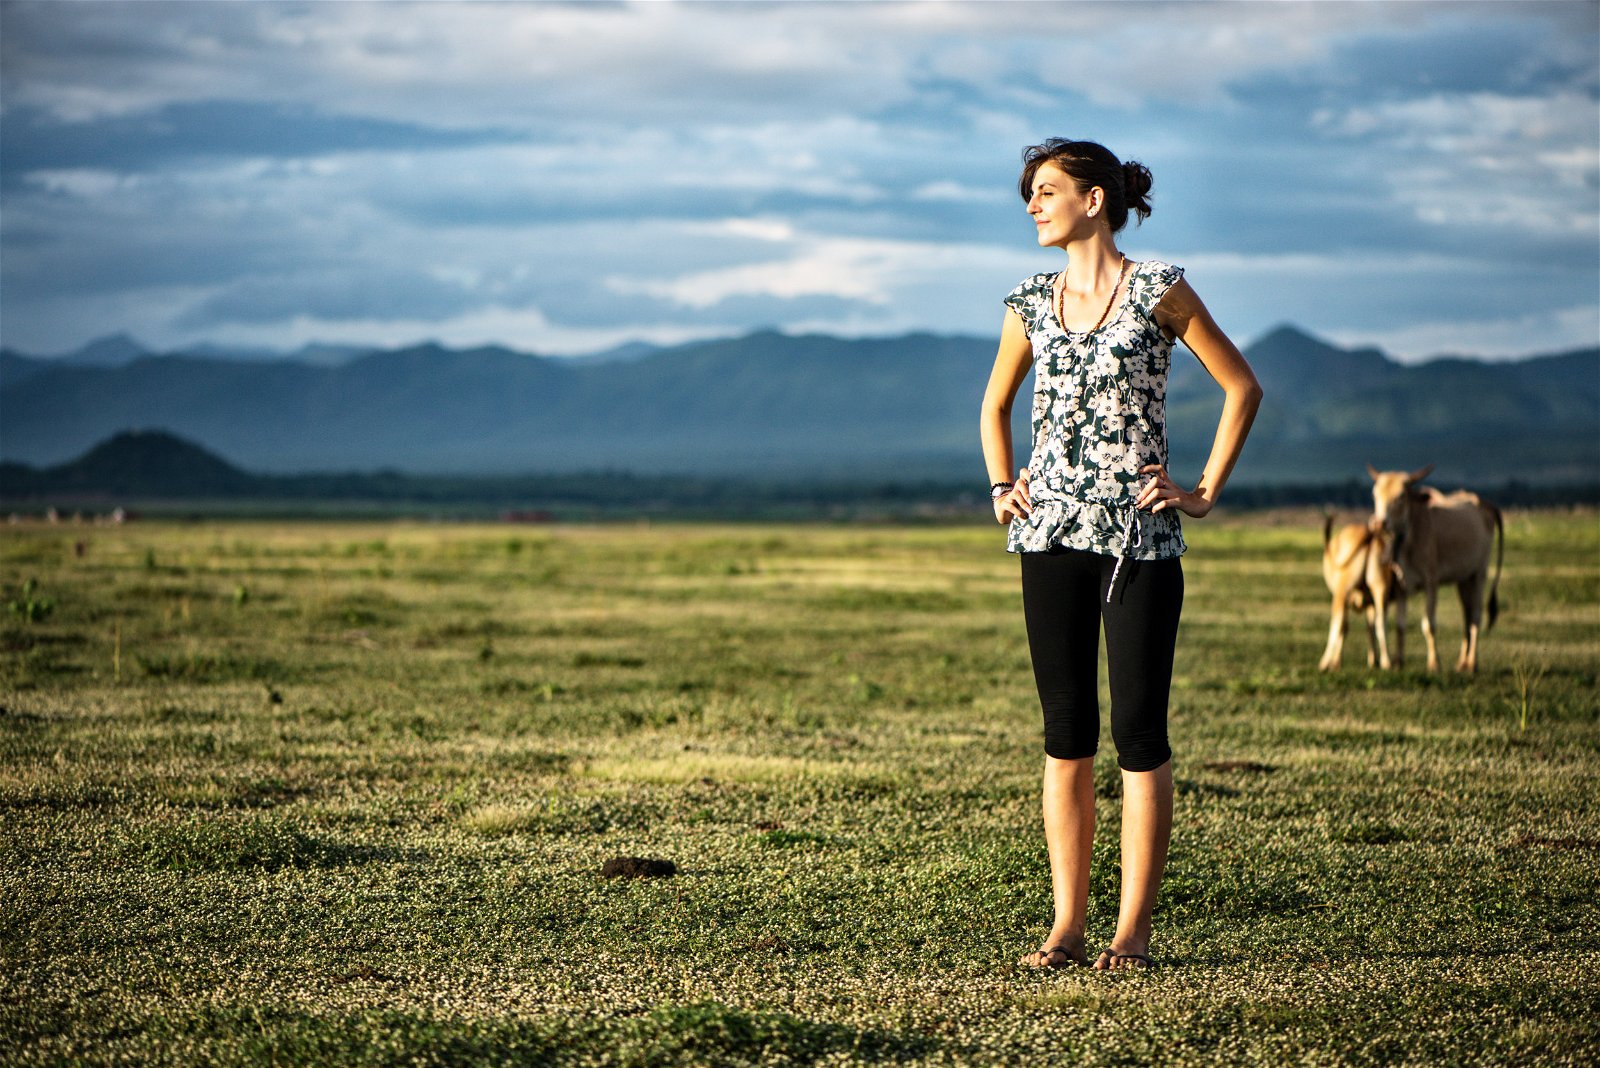 Young woman standing in an open field.